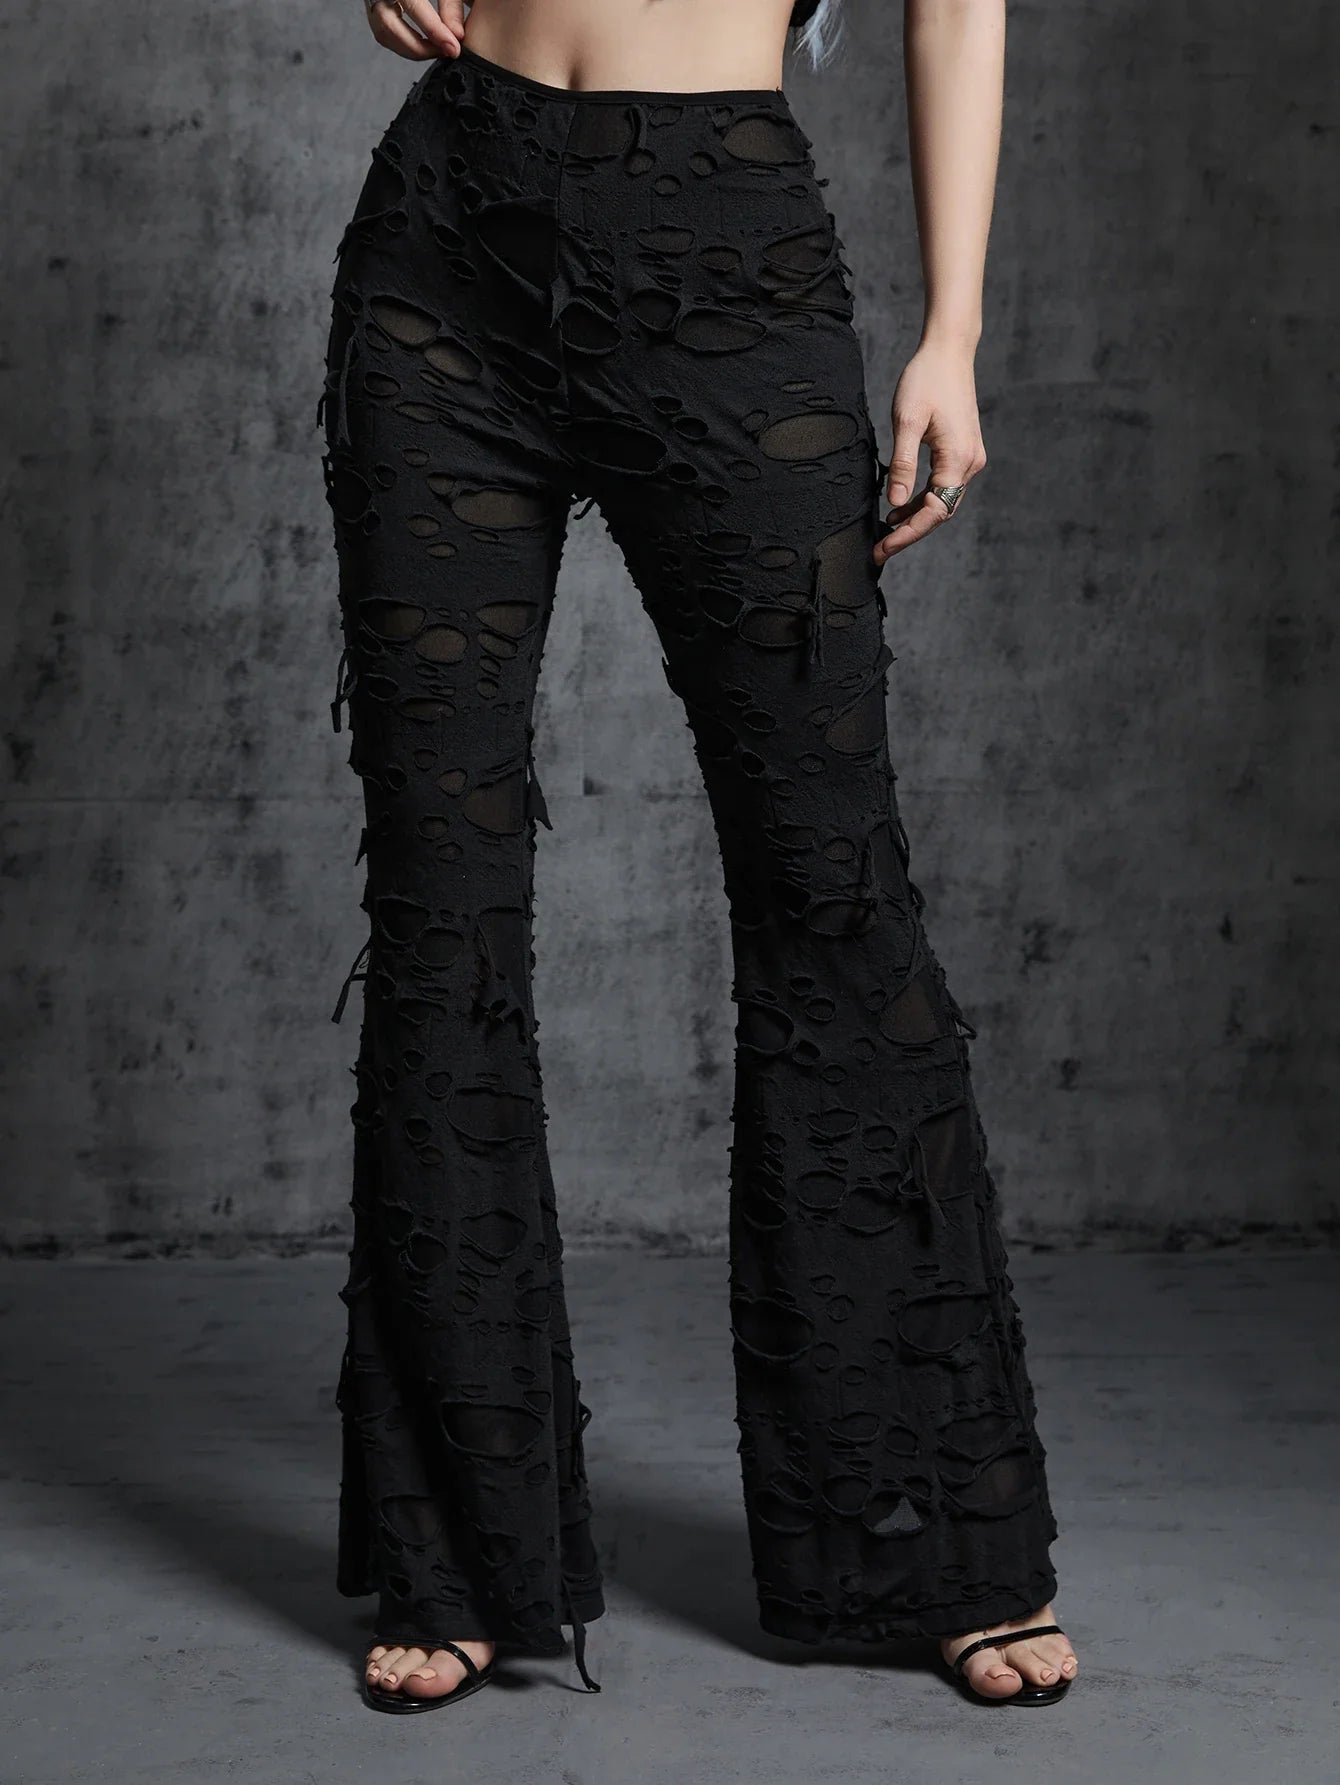 Women's Gothic Style Halloween Ripped Fabric Slim Long Flare Pants